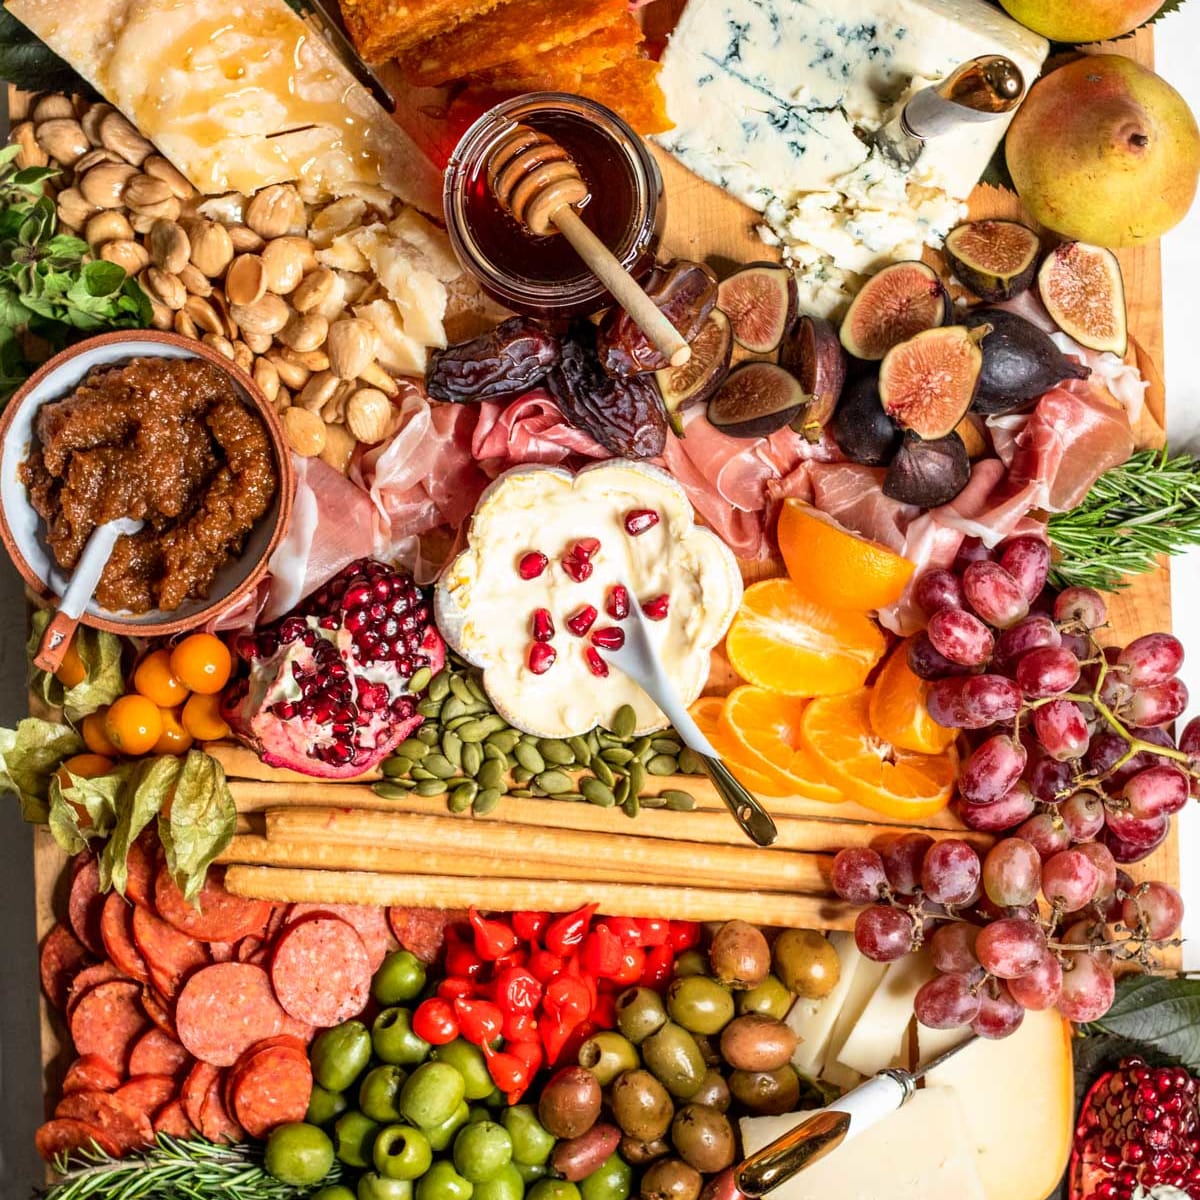 How to Make an Epic Cheese Board - Flavor the Moments